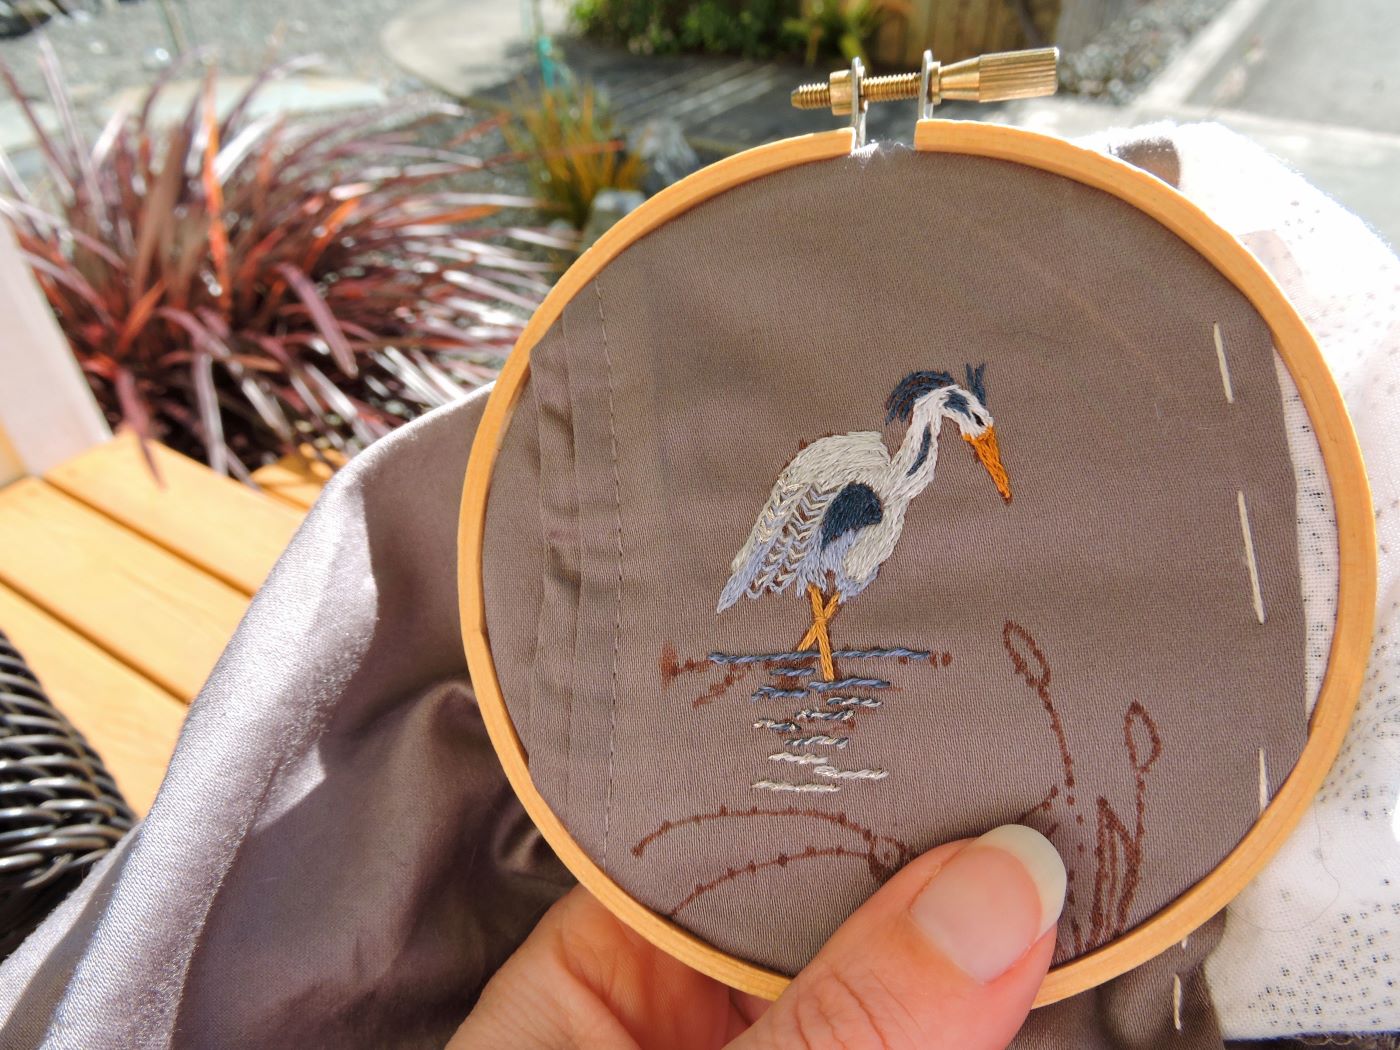 embroidery hoop with blue heron egret stitched